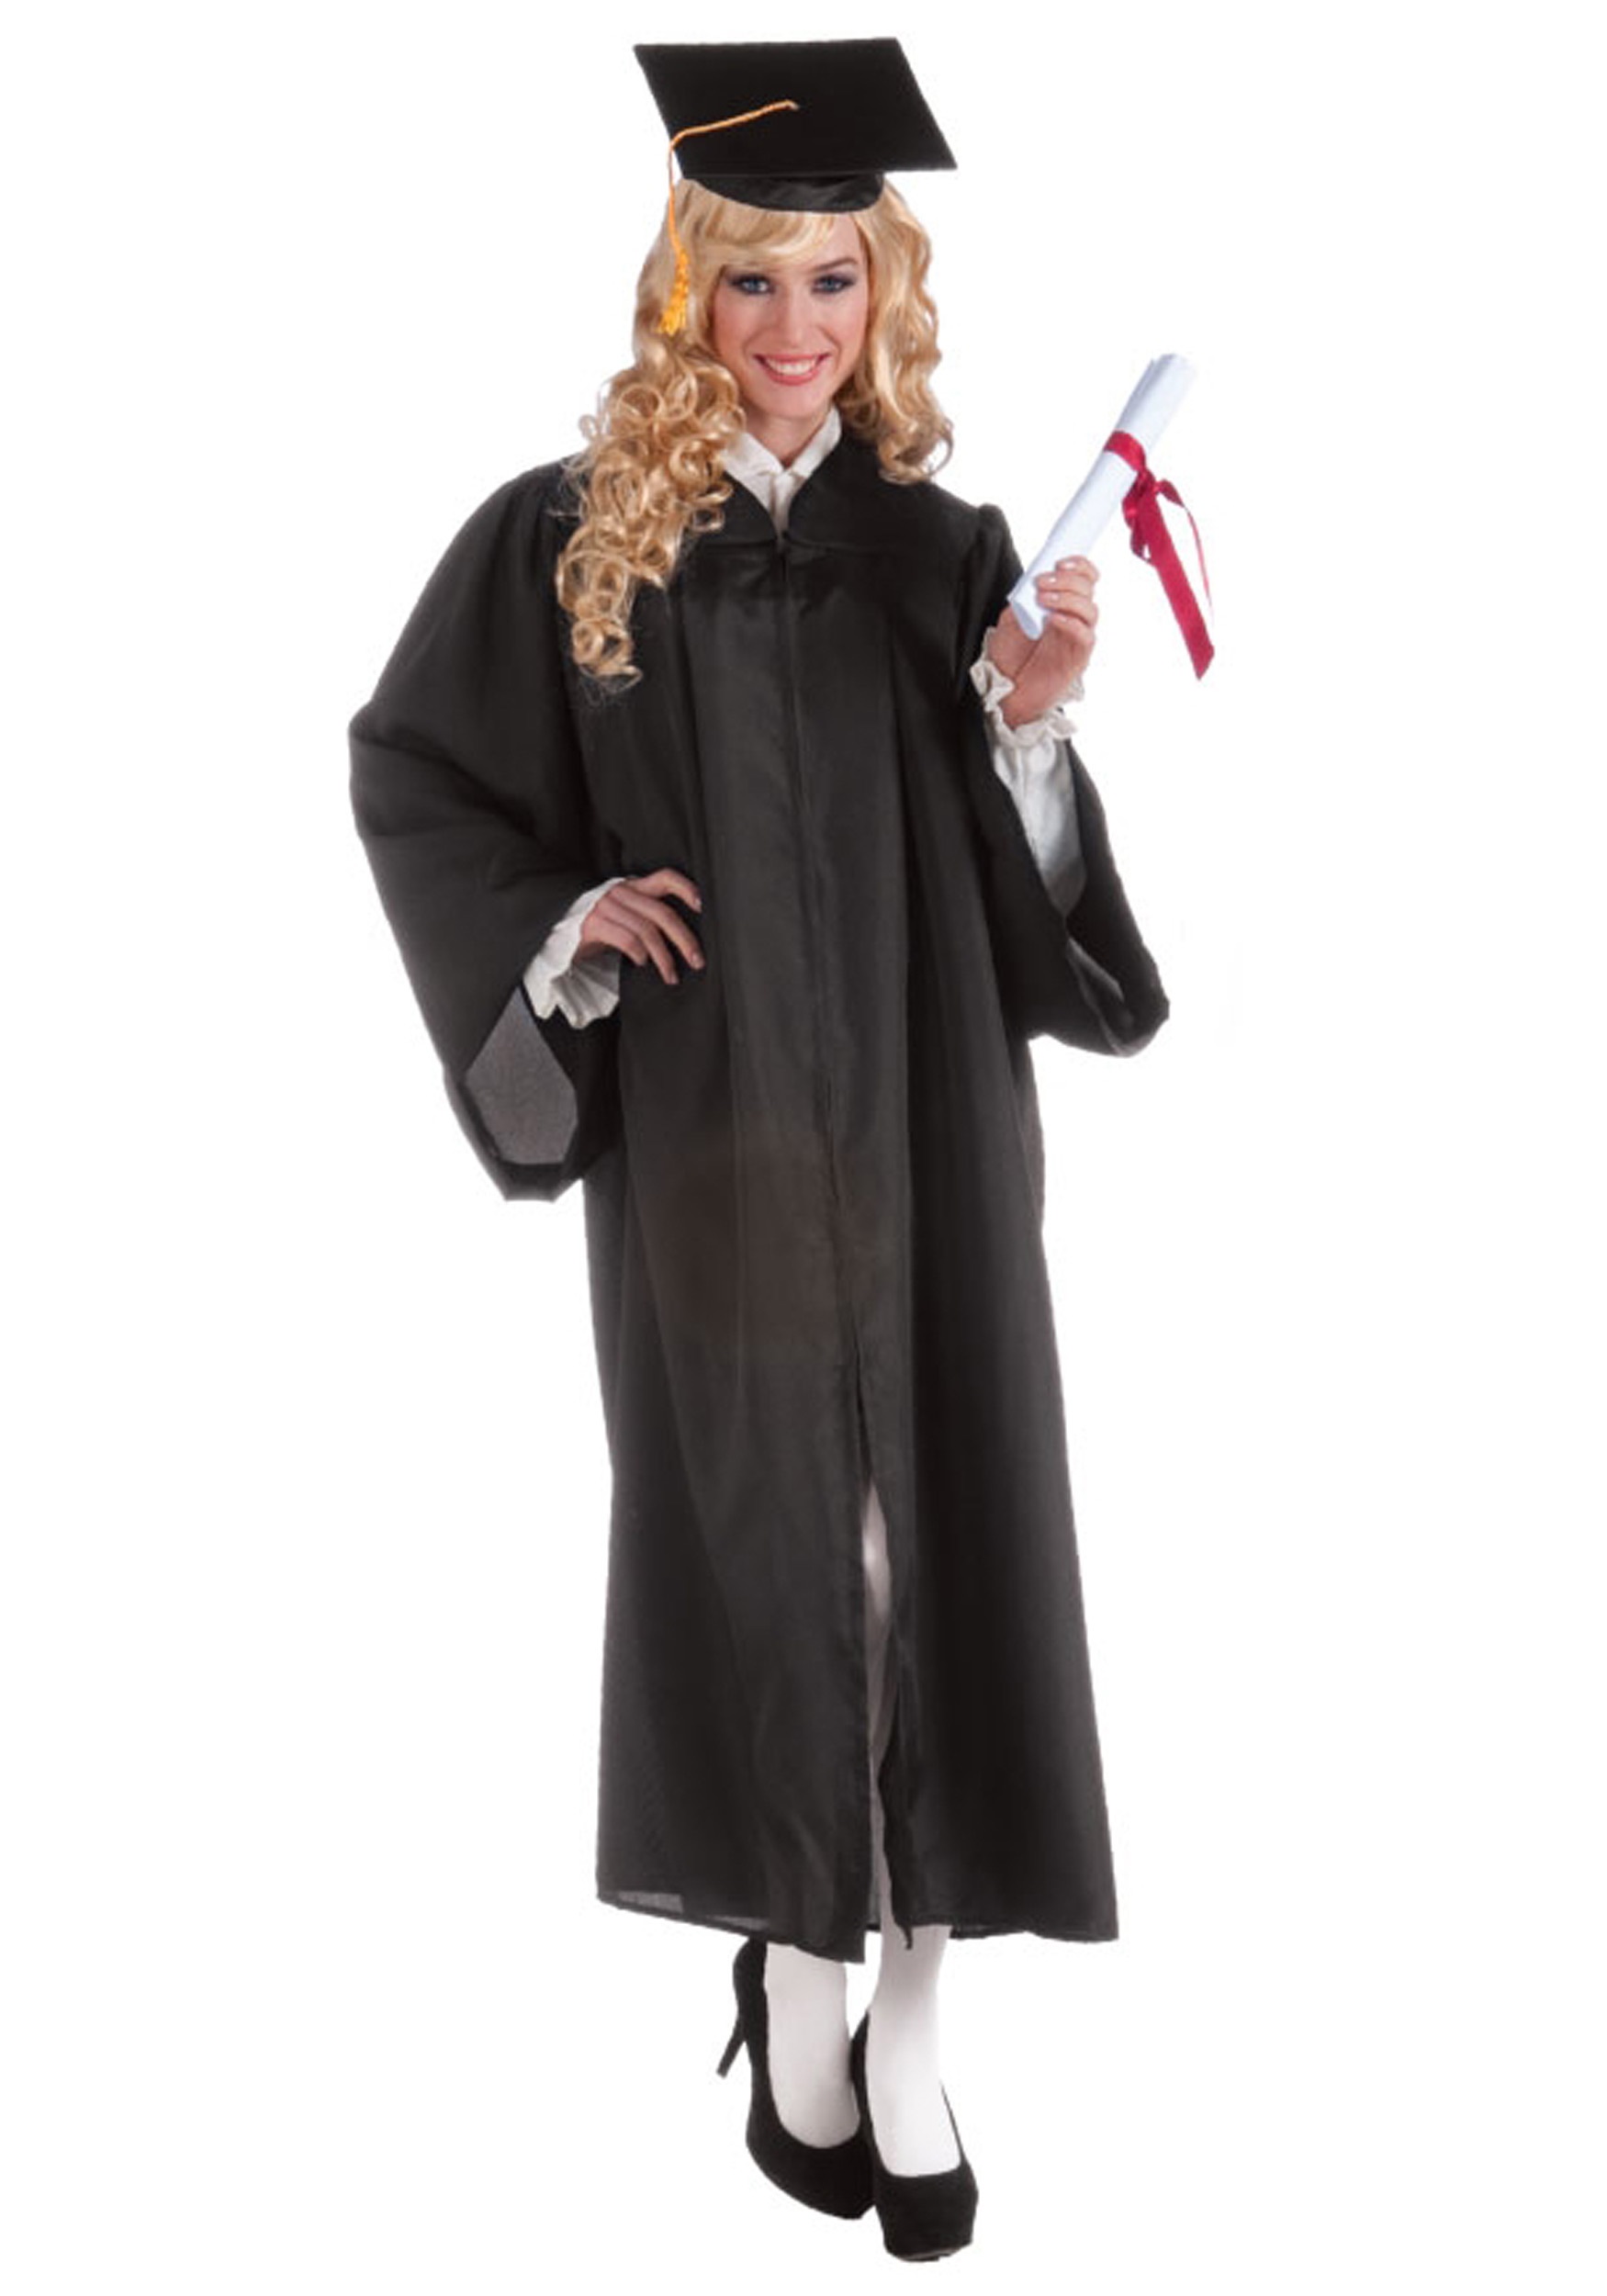 Rudra Fancydress Convocation gown for kids | graduation gown & Cap for Kids  Costume Wear Price in India - Buy Rudra Fancydress Convocation gown for  kids | graduation gown & Cap for